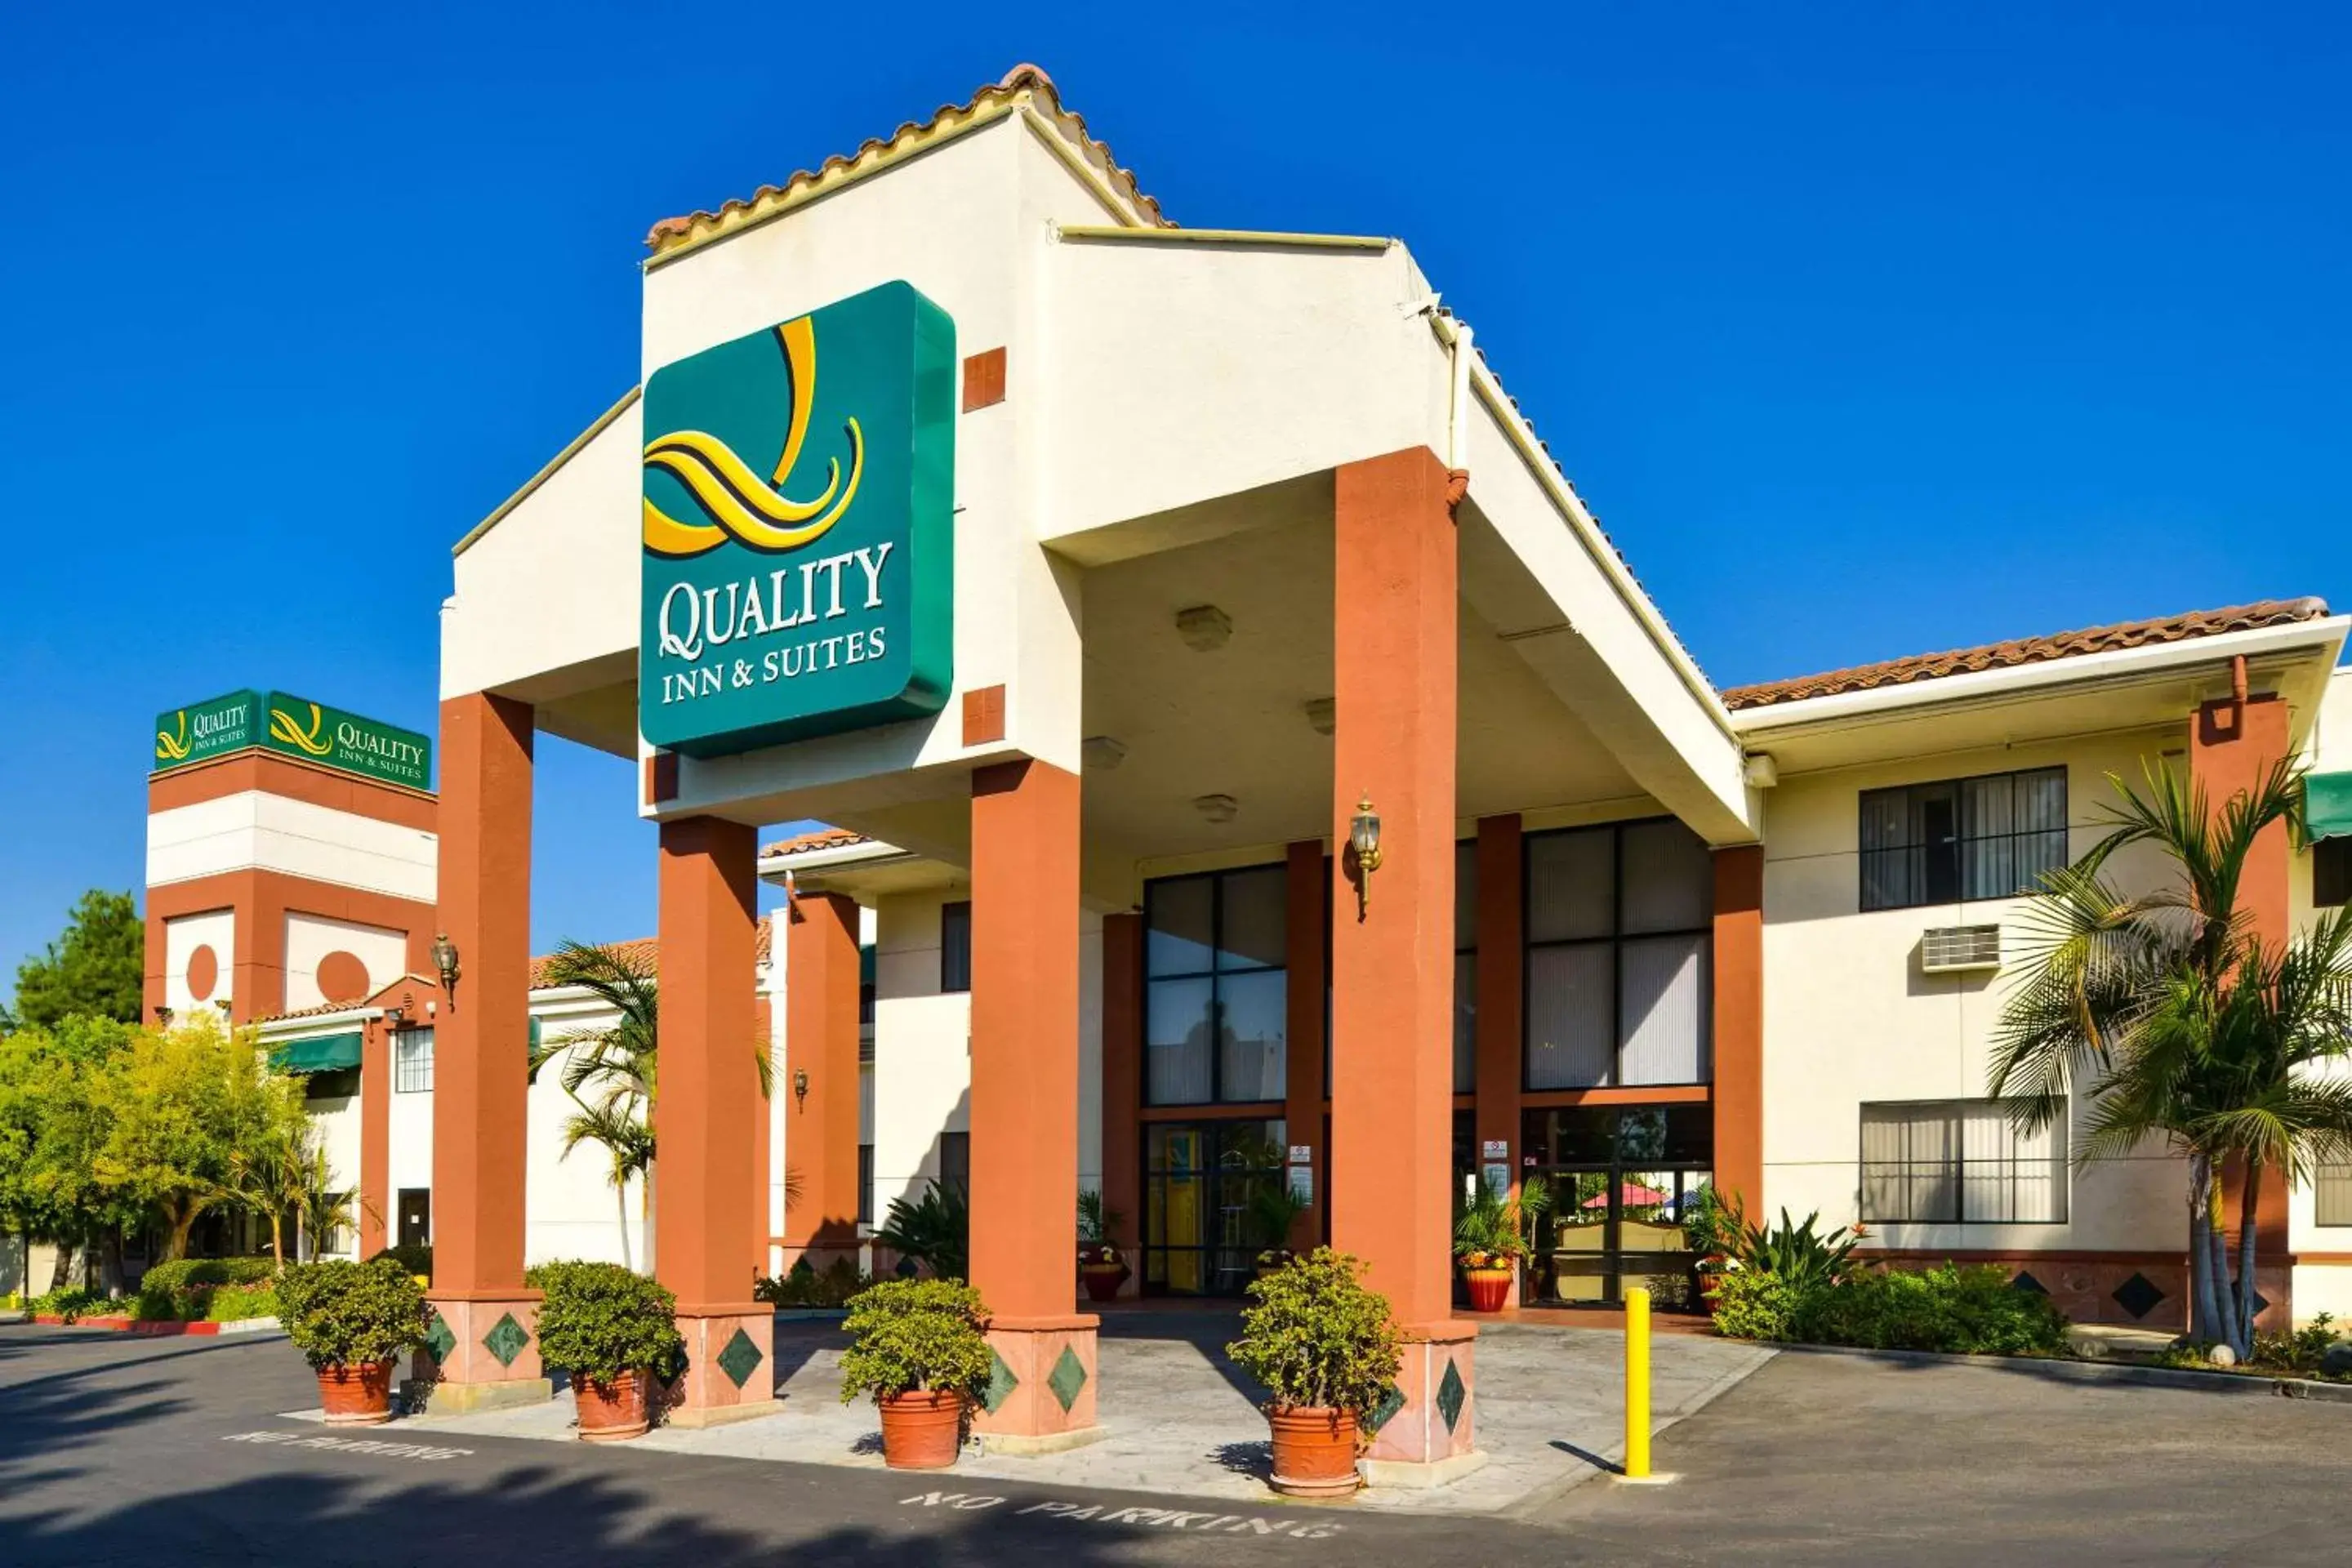 Property building in Quality Inn & Suites Walnut - City of Industry